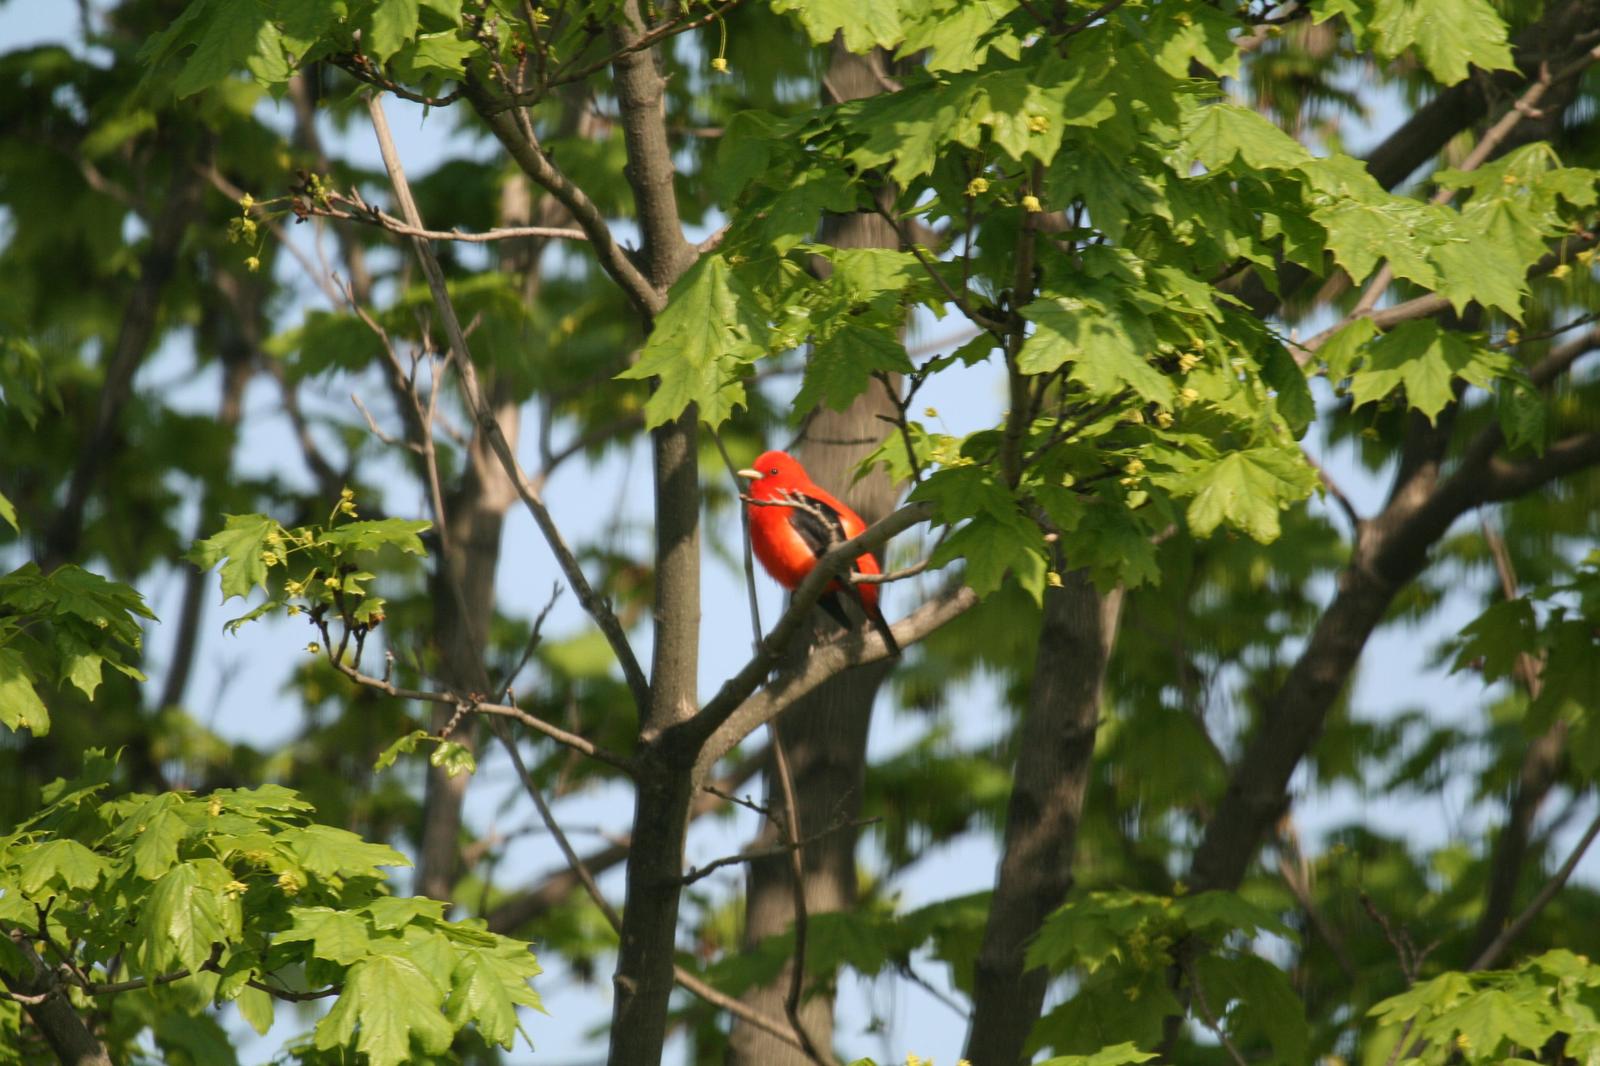 Scarlet Tanager Photo by Roseanne CALECA